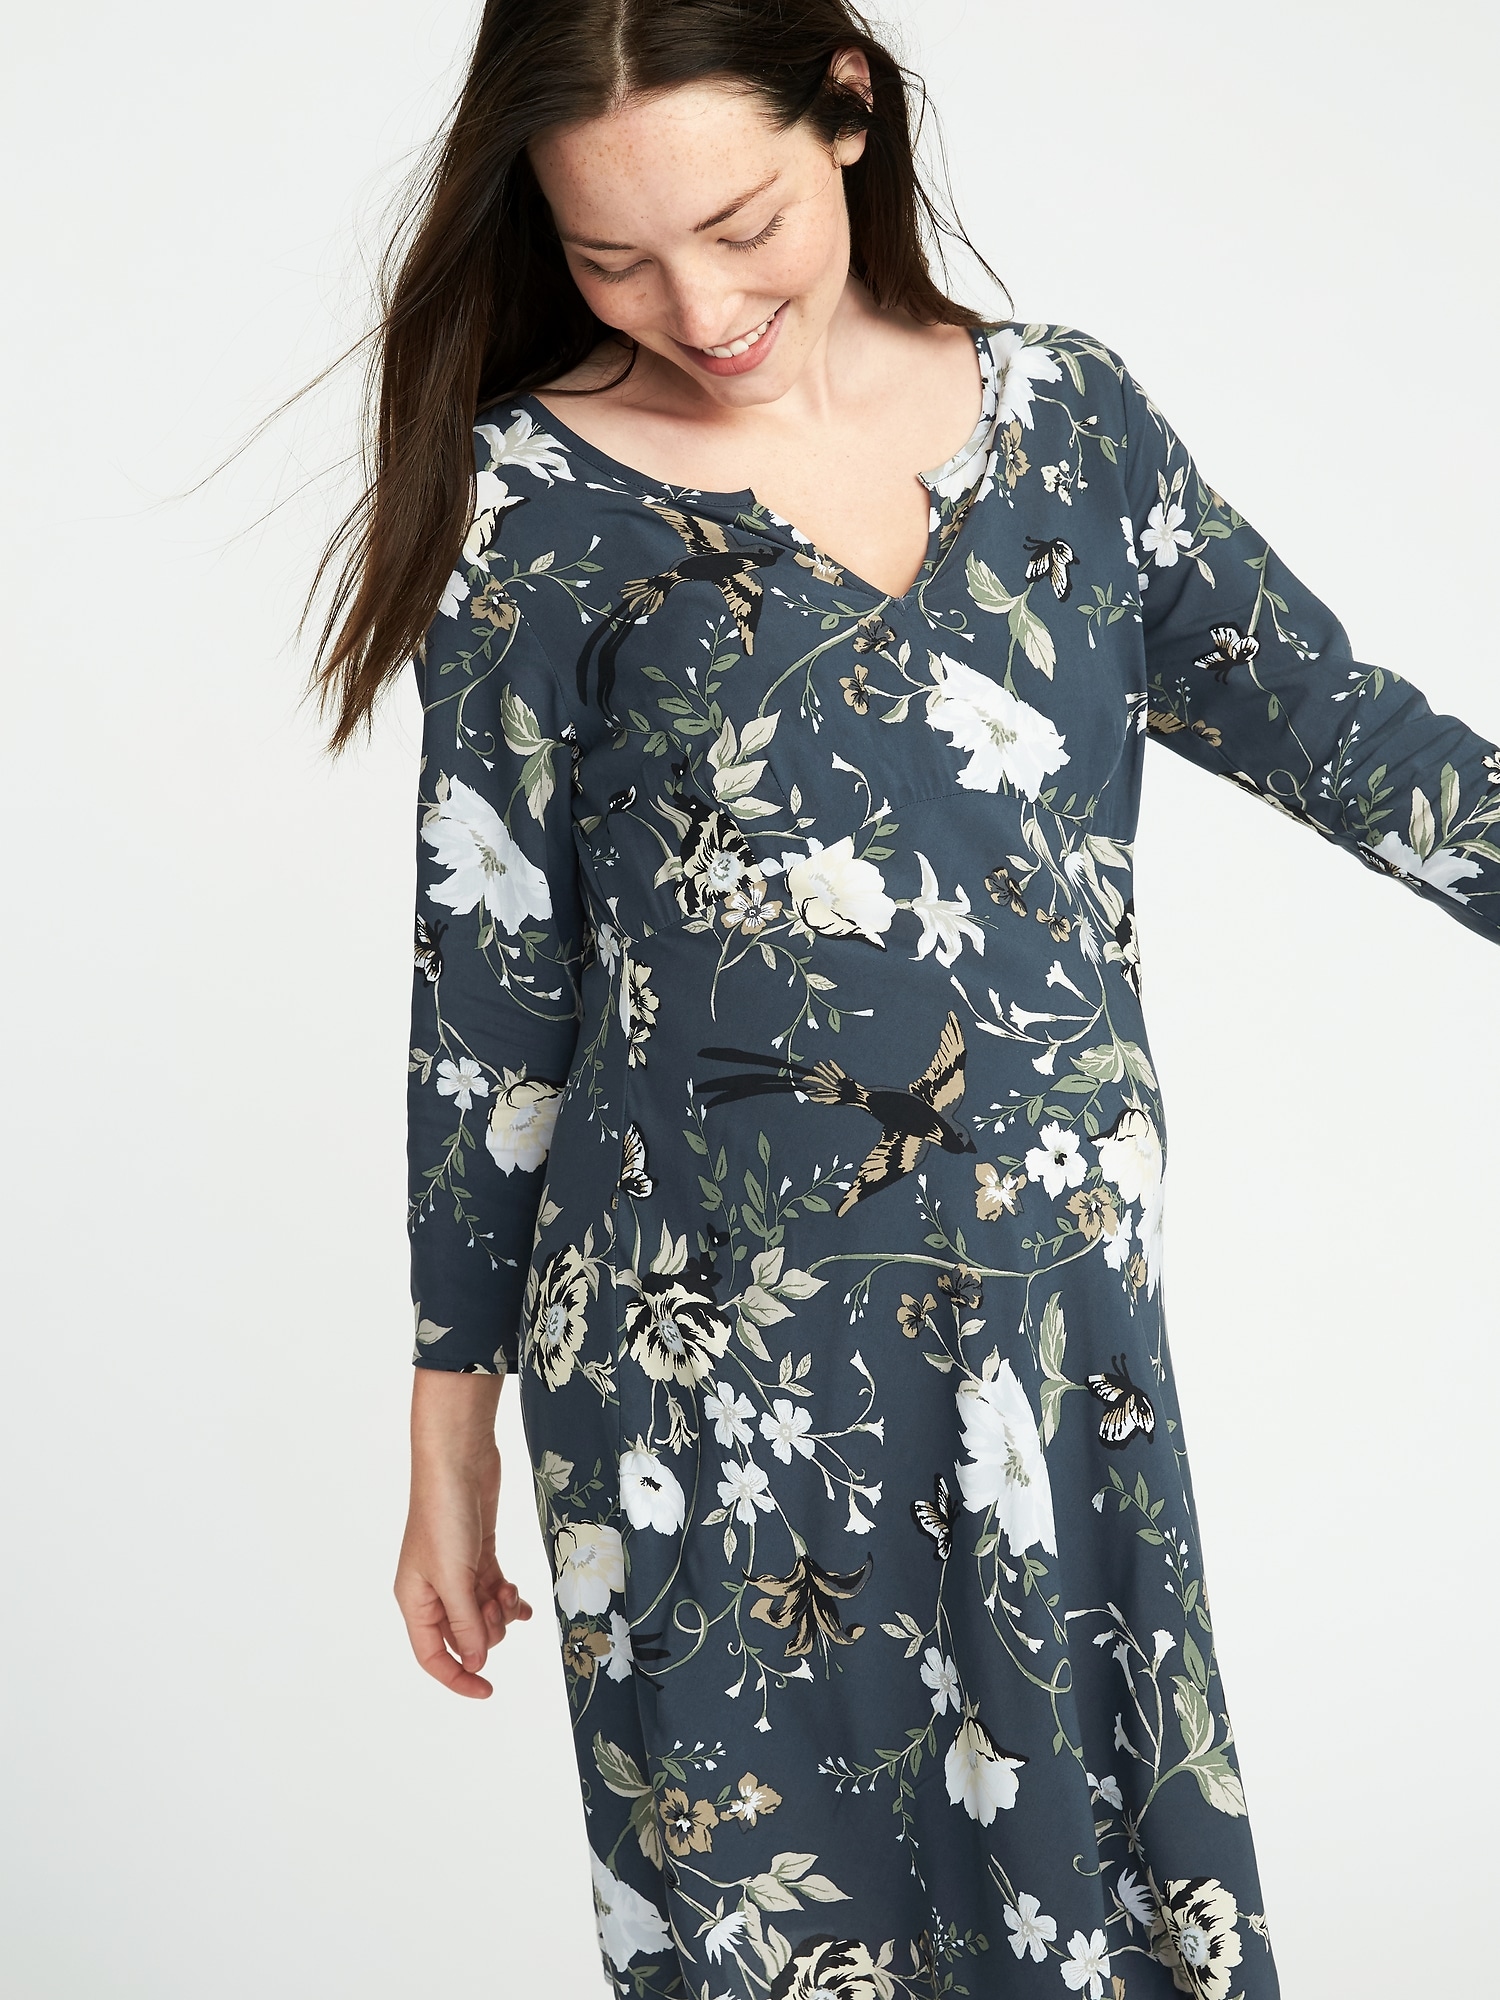 Maternity Floral-Print Swing Dress | Old Navy